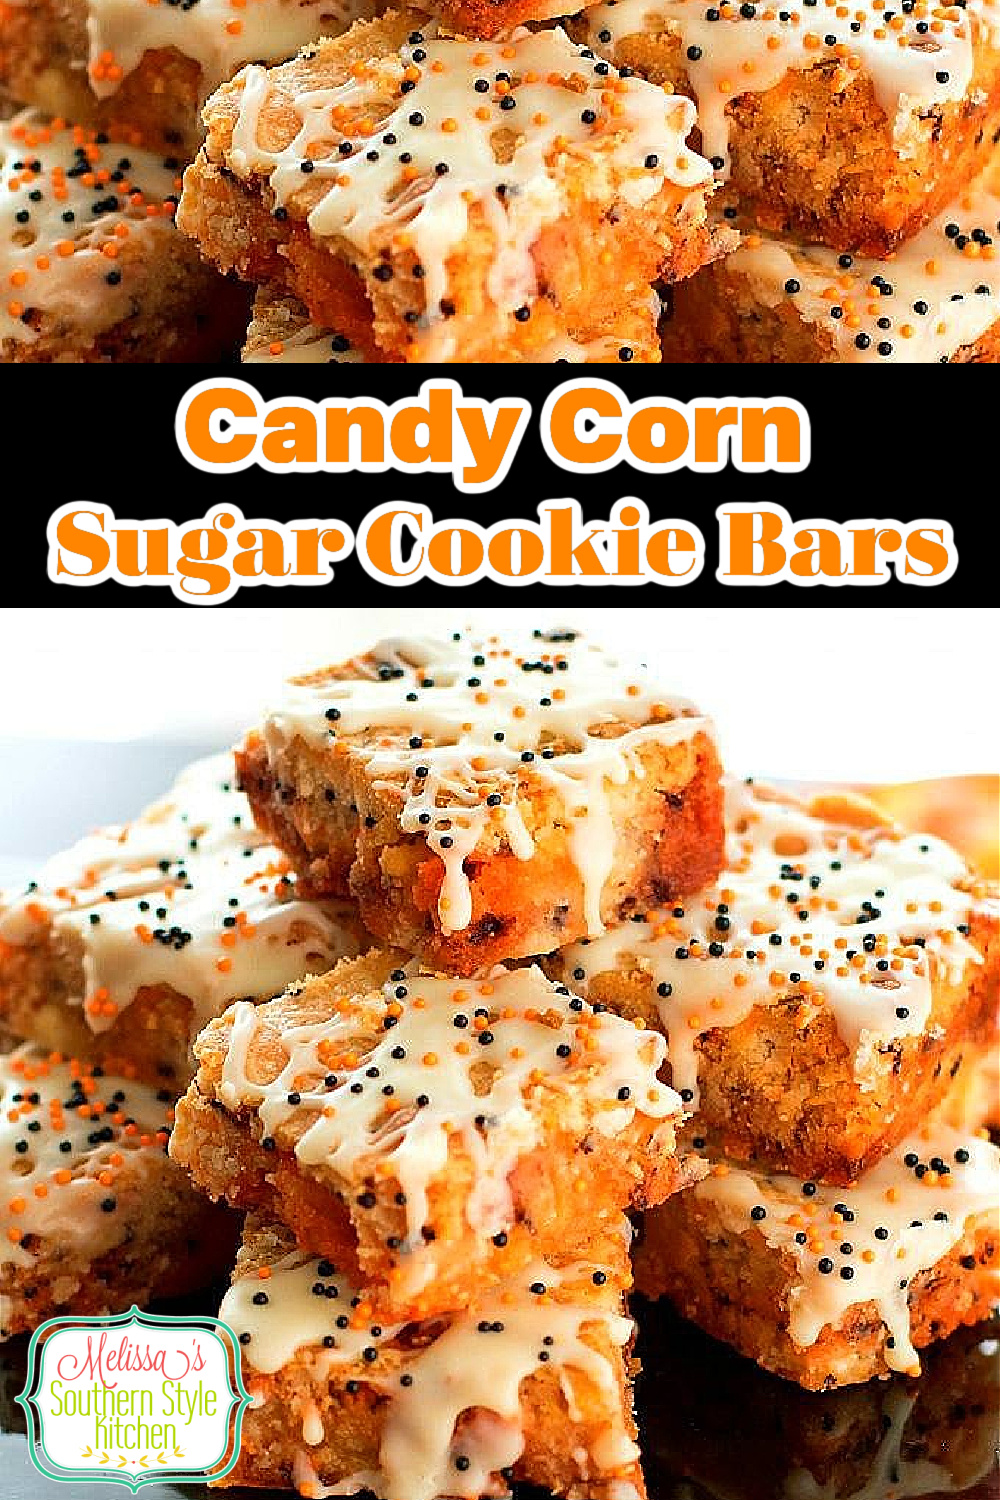 Kids of all ages love these rich and chewy Candy Corn Sugar Cookie Bars #sugarcookiebars #candycorncookies #candycornsugarcookiebars #candycorn #dessets #fallbaking #falldesserts #cookies #thanksgivingdessets #southernfood #dessertfoodrecipes #southerndesserts